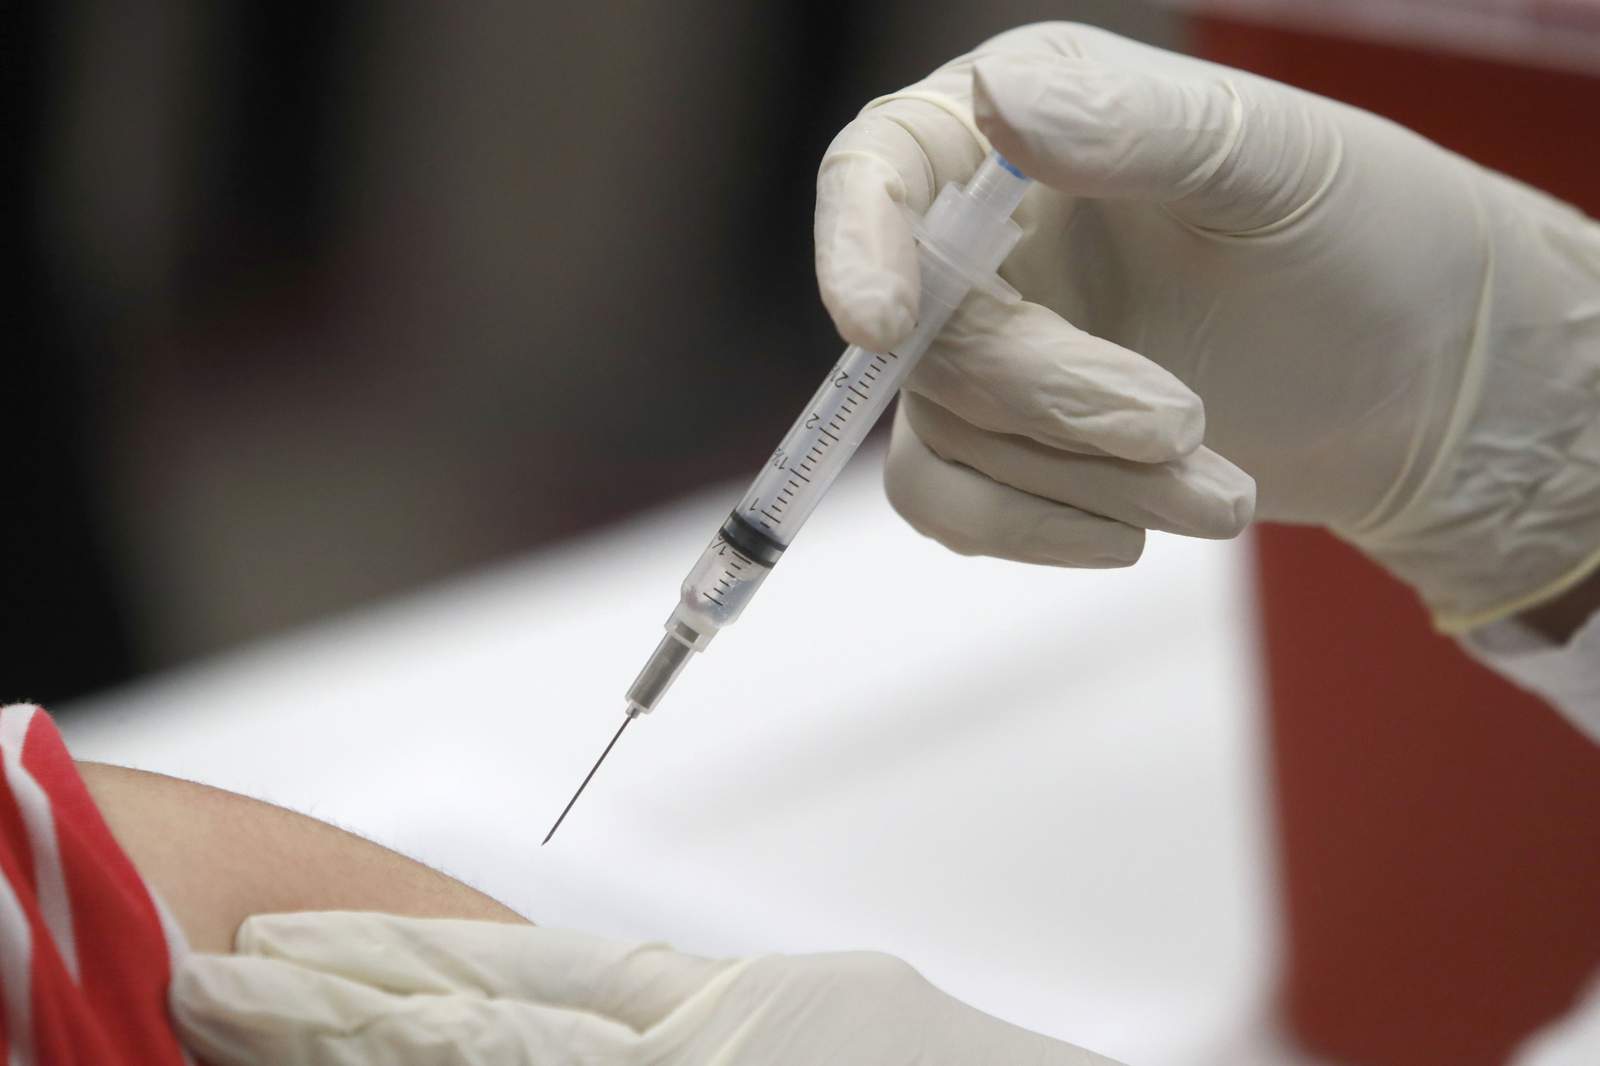 Gov. Greg Abbott urges vaccinations ahead of what could be prolific flu season